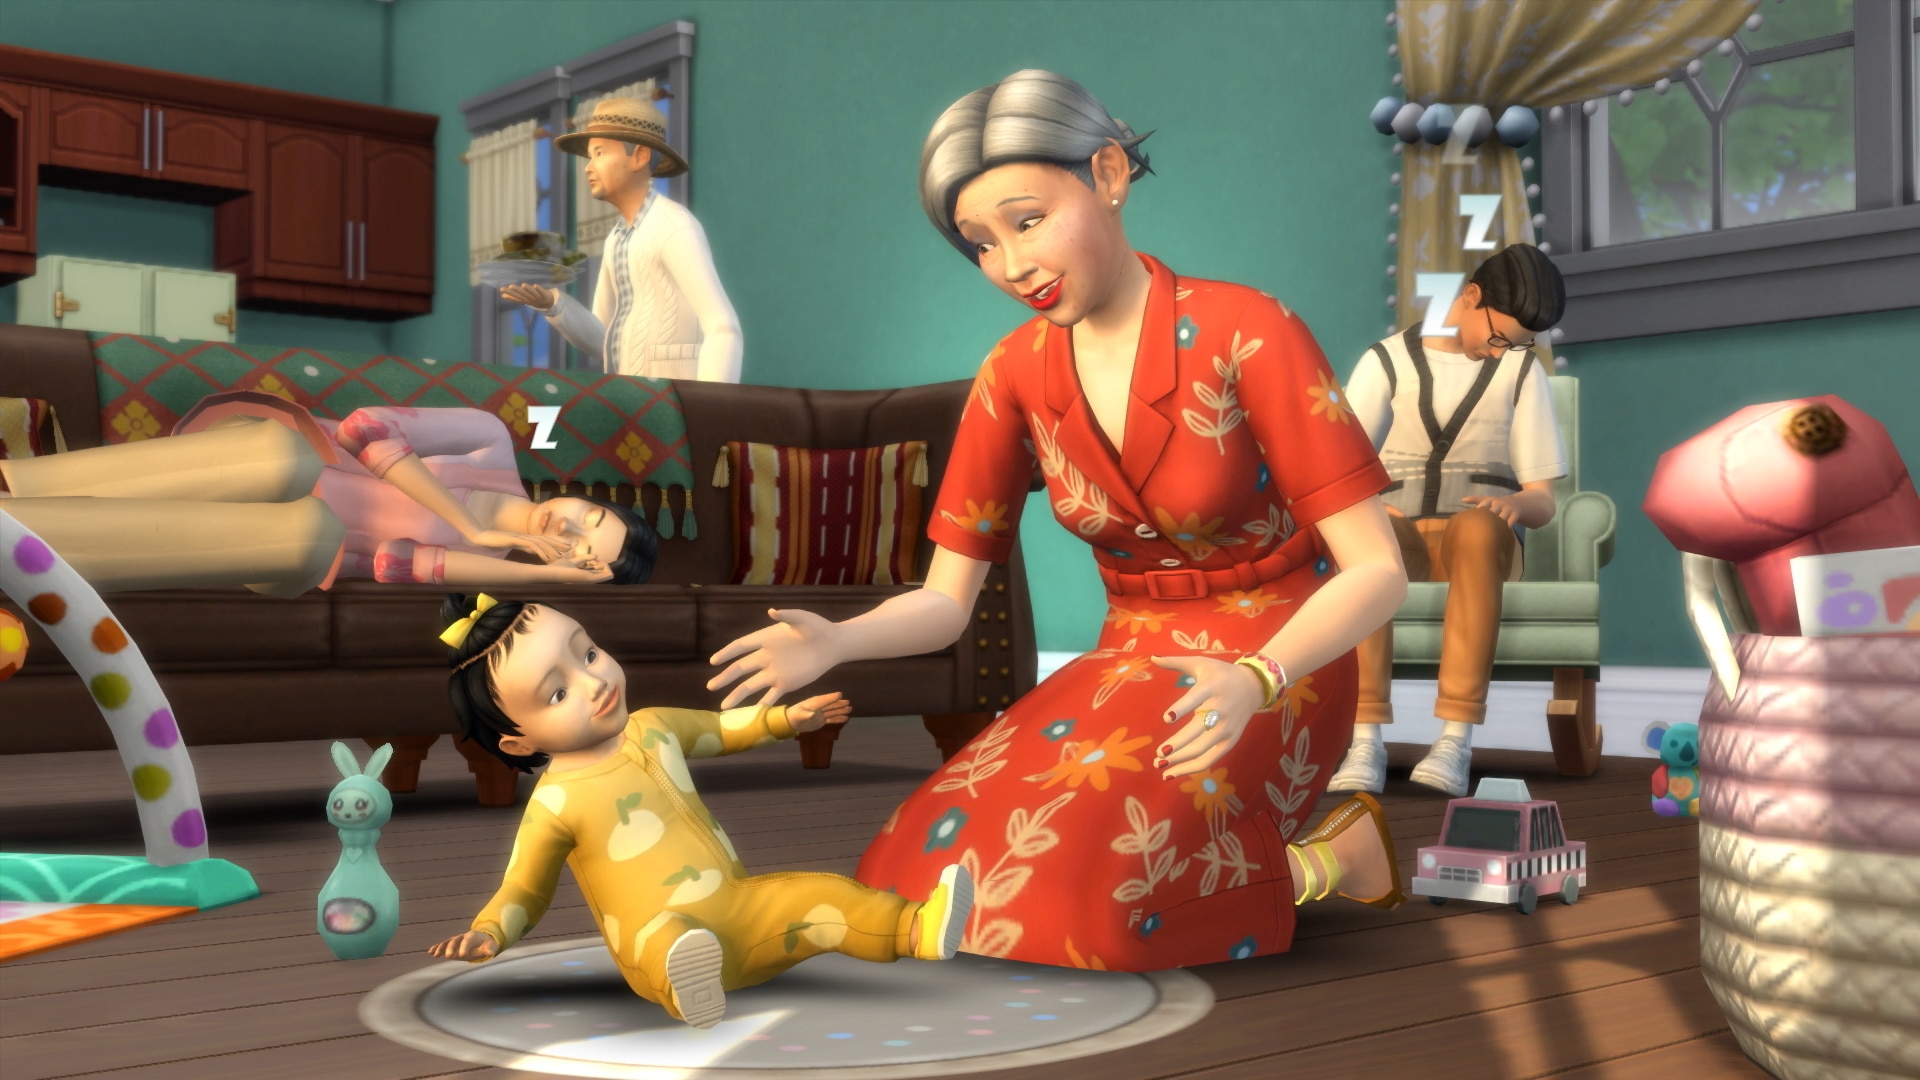 The Sims 4 - An older grandma Sim dotes over a baby Sim as a family goes about their daily life in the living room.